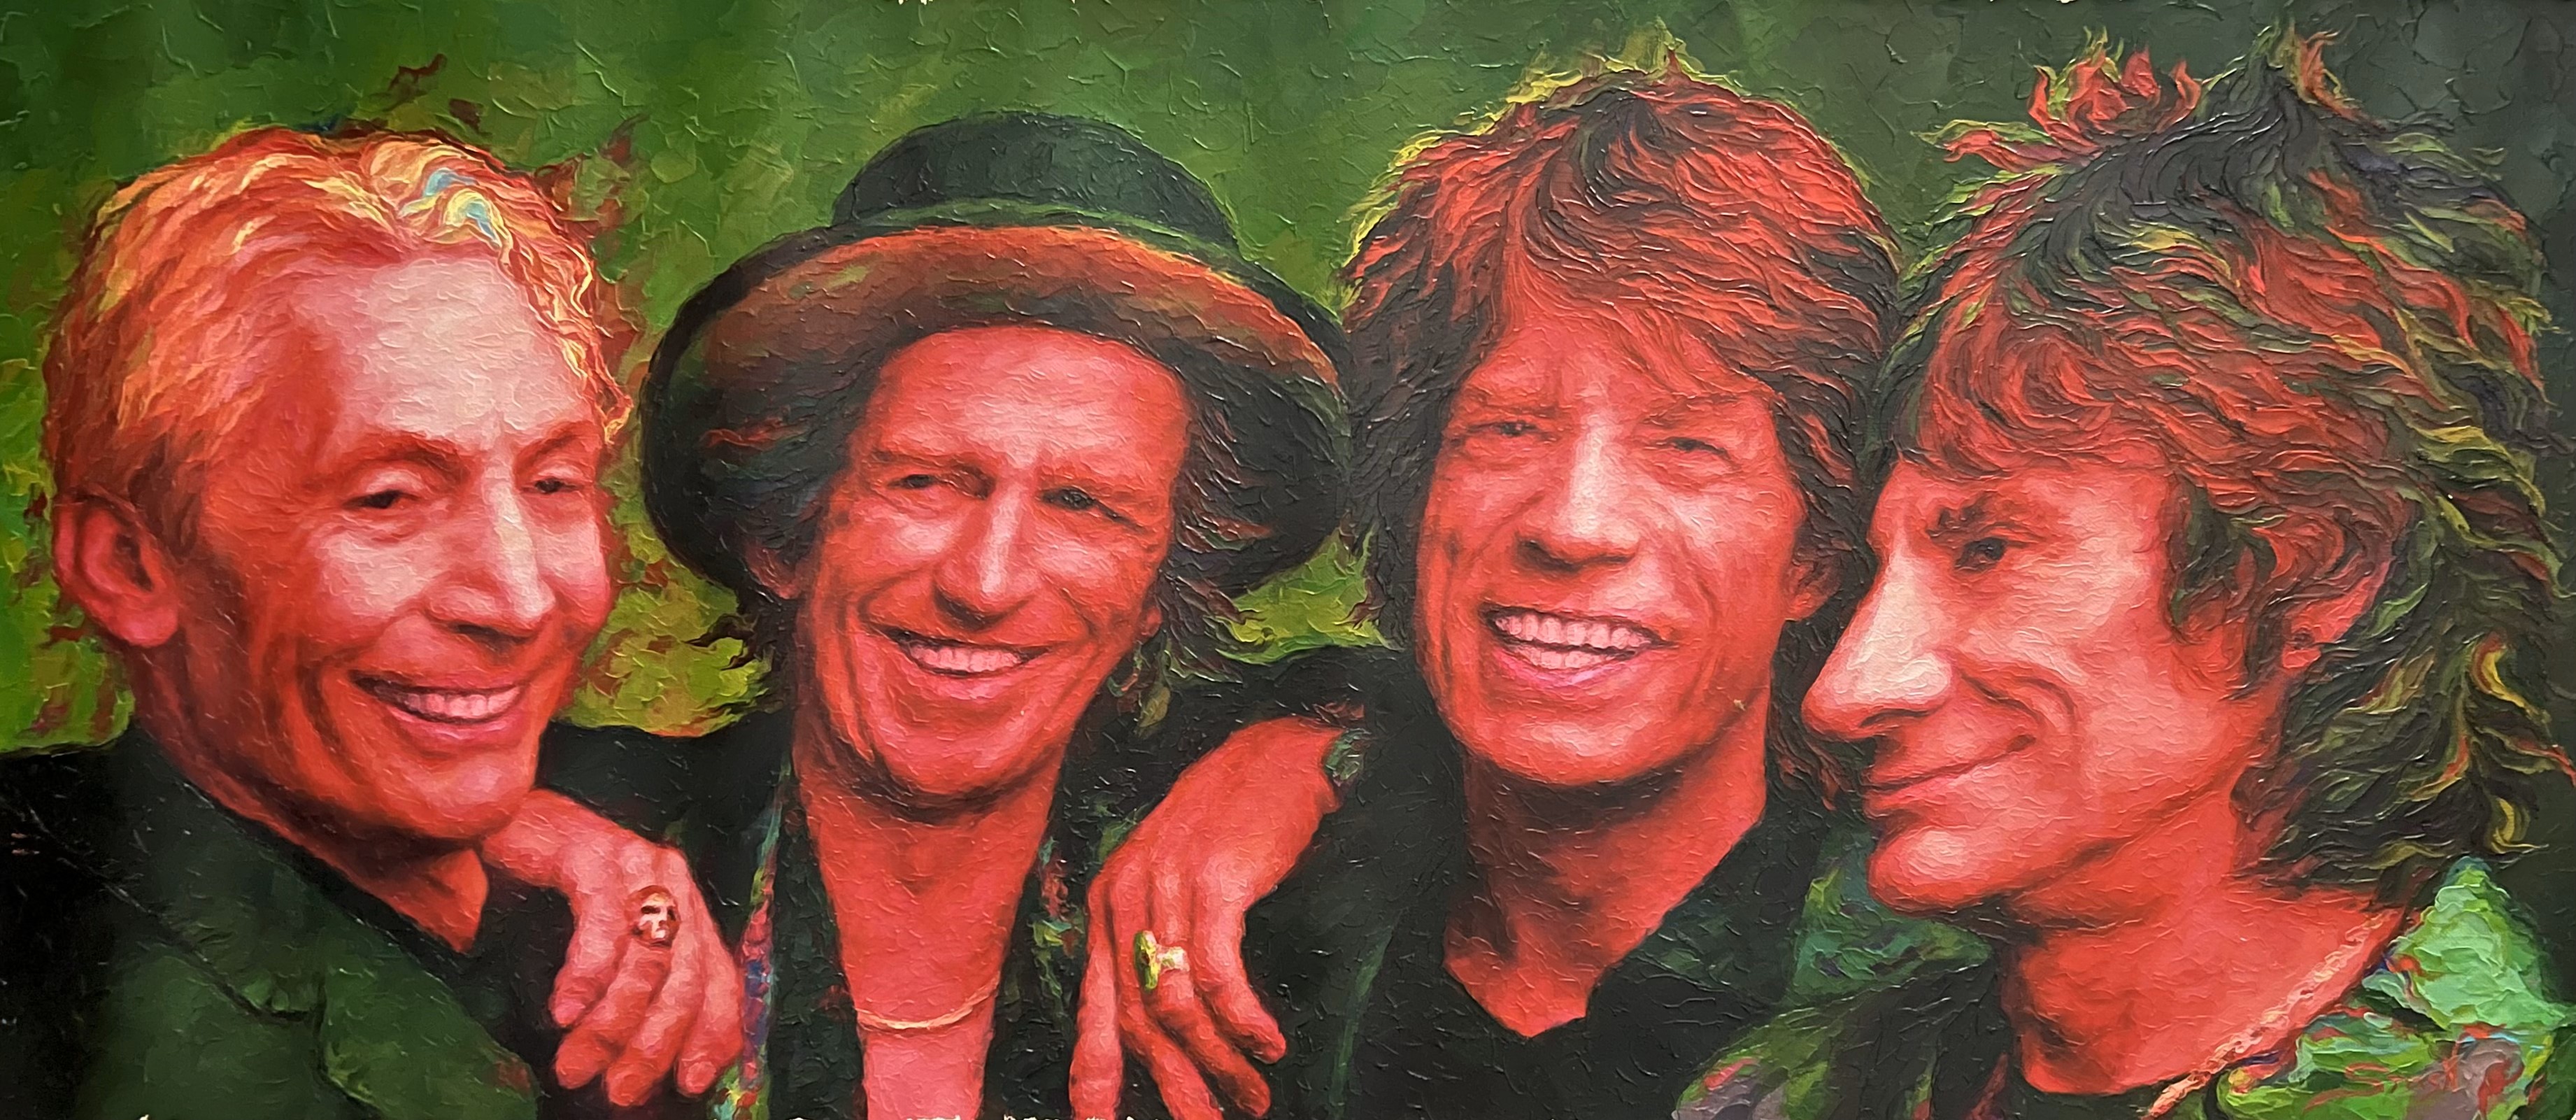 STAS NAMIN - Rolling Stones - Oil on Canvas - 39x17 inches